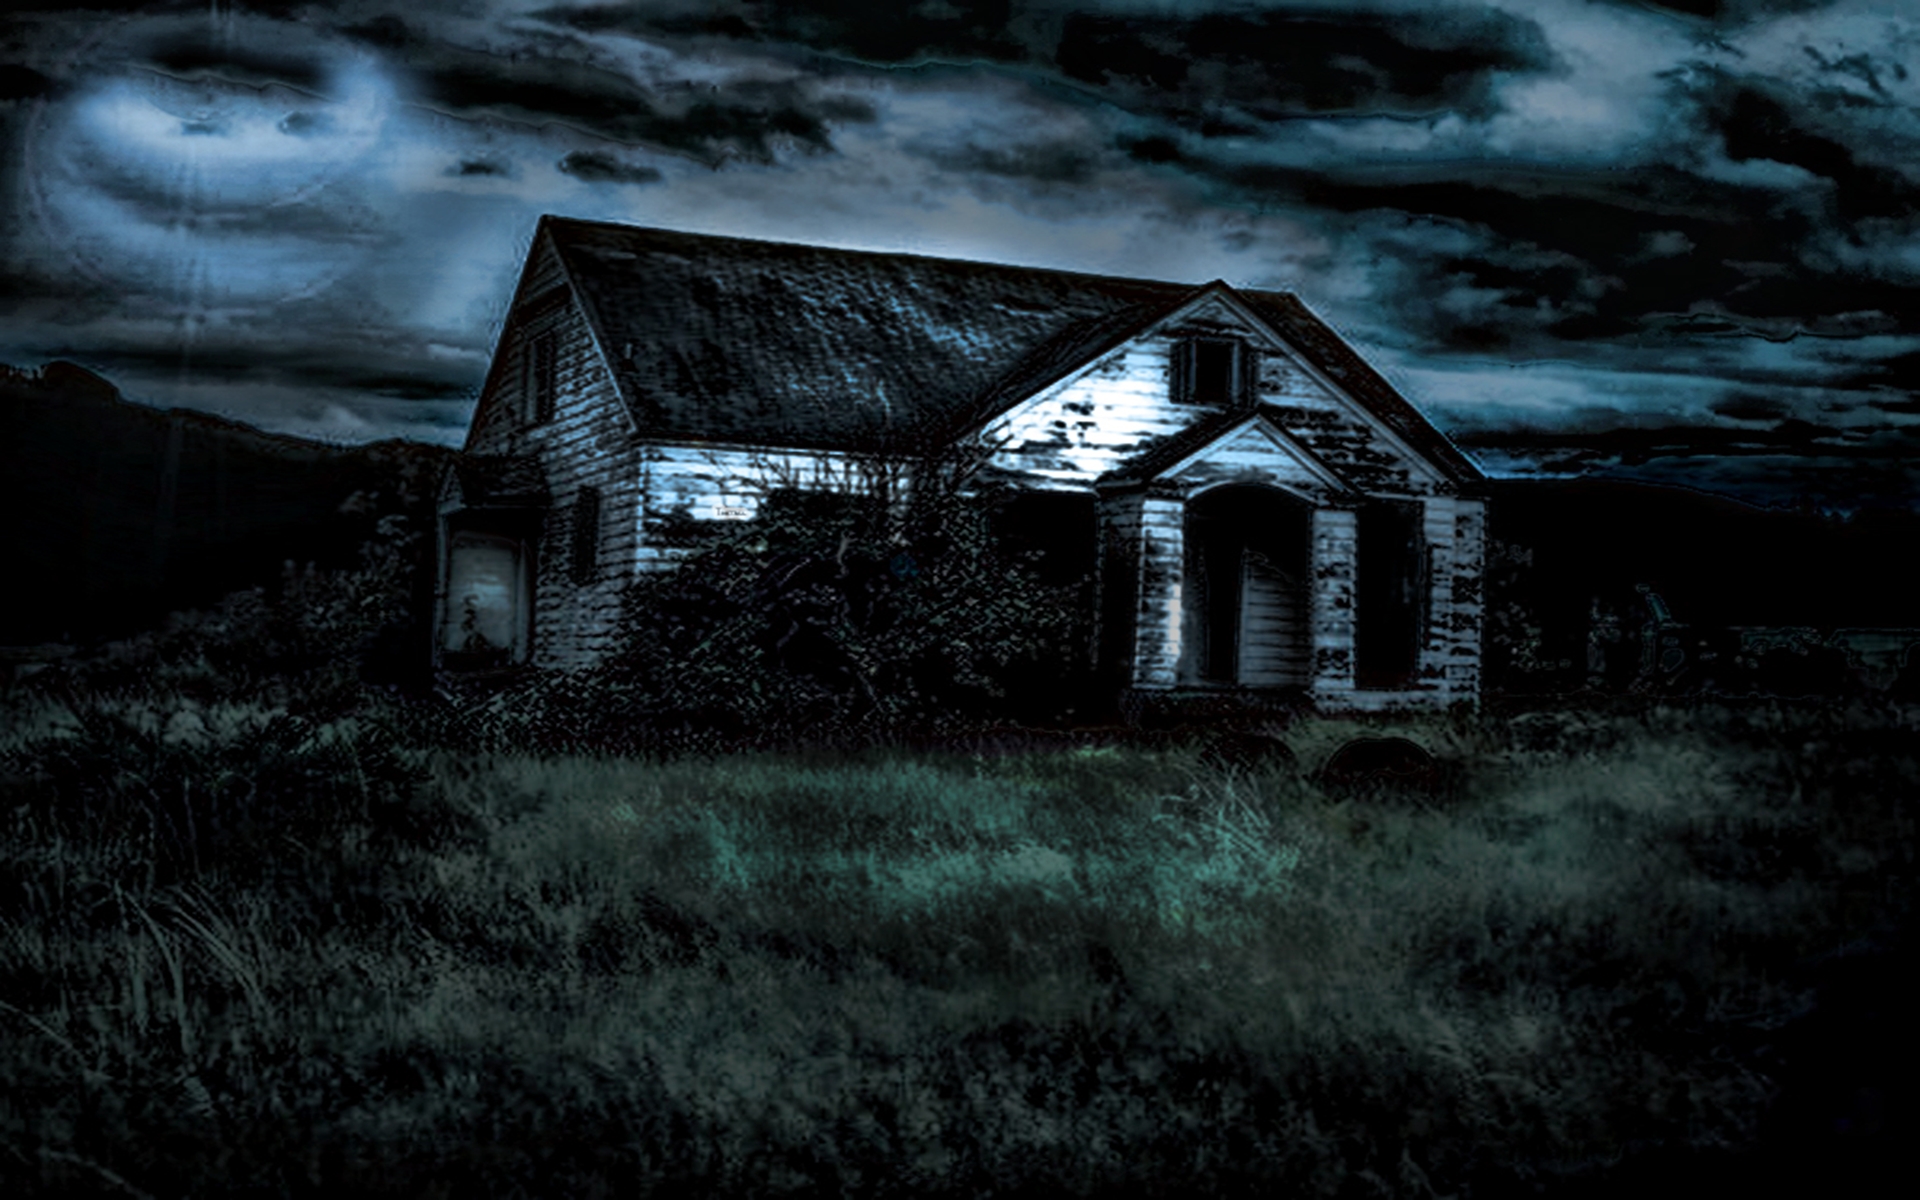 Scary House Backgrounds wallpaper | 1920x1200 | #22425